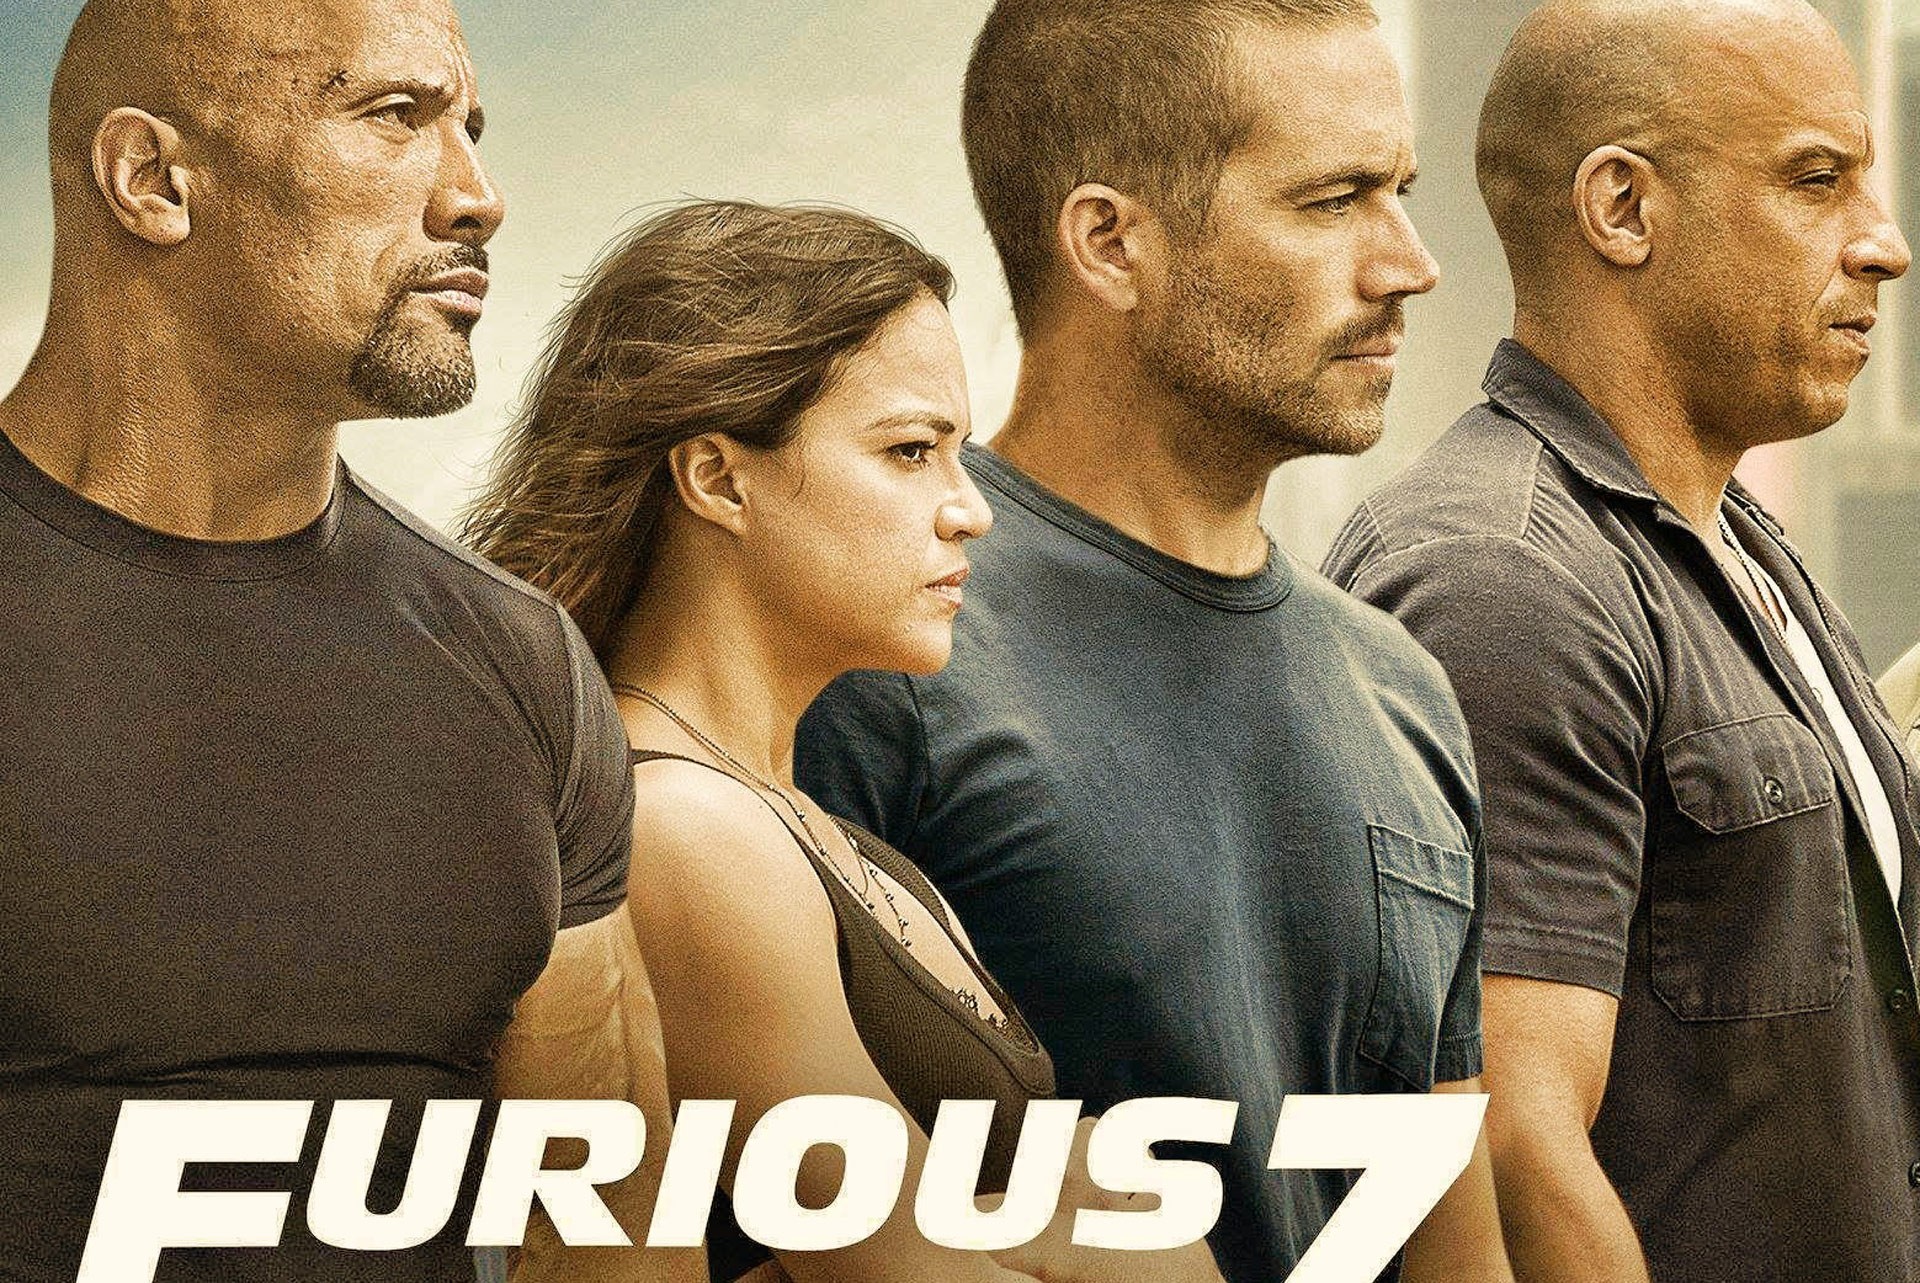 fast and furious 7 free download in hindi hd 720p